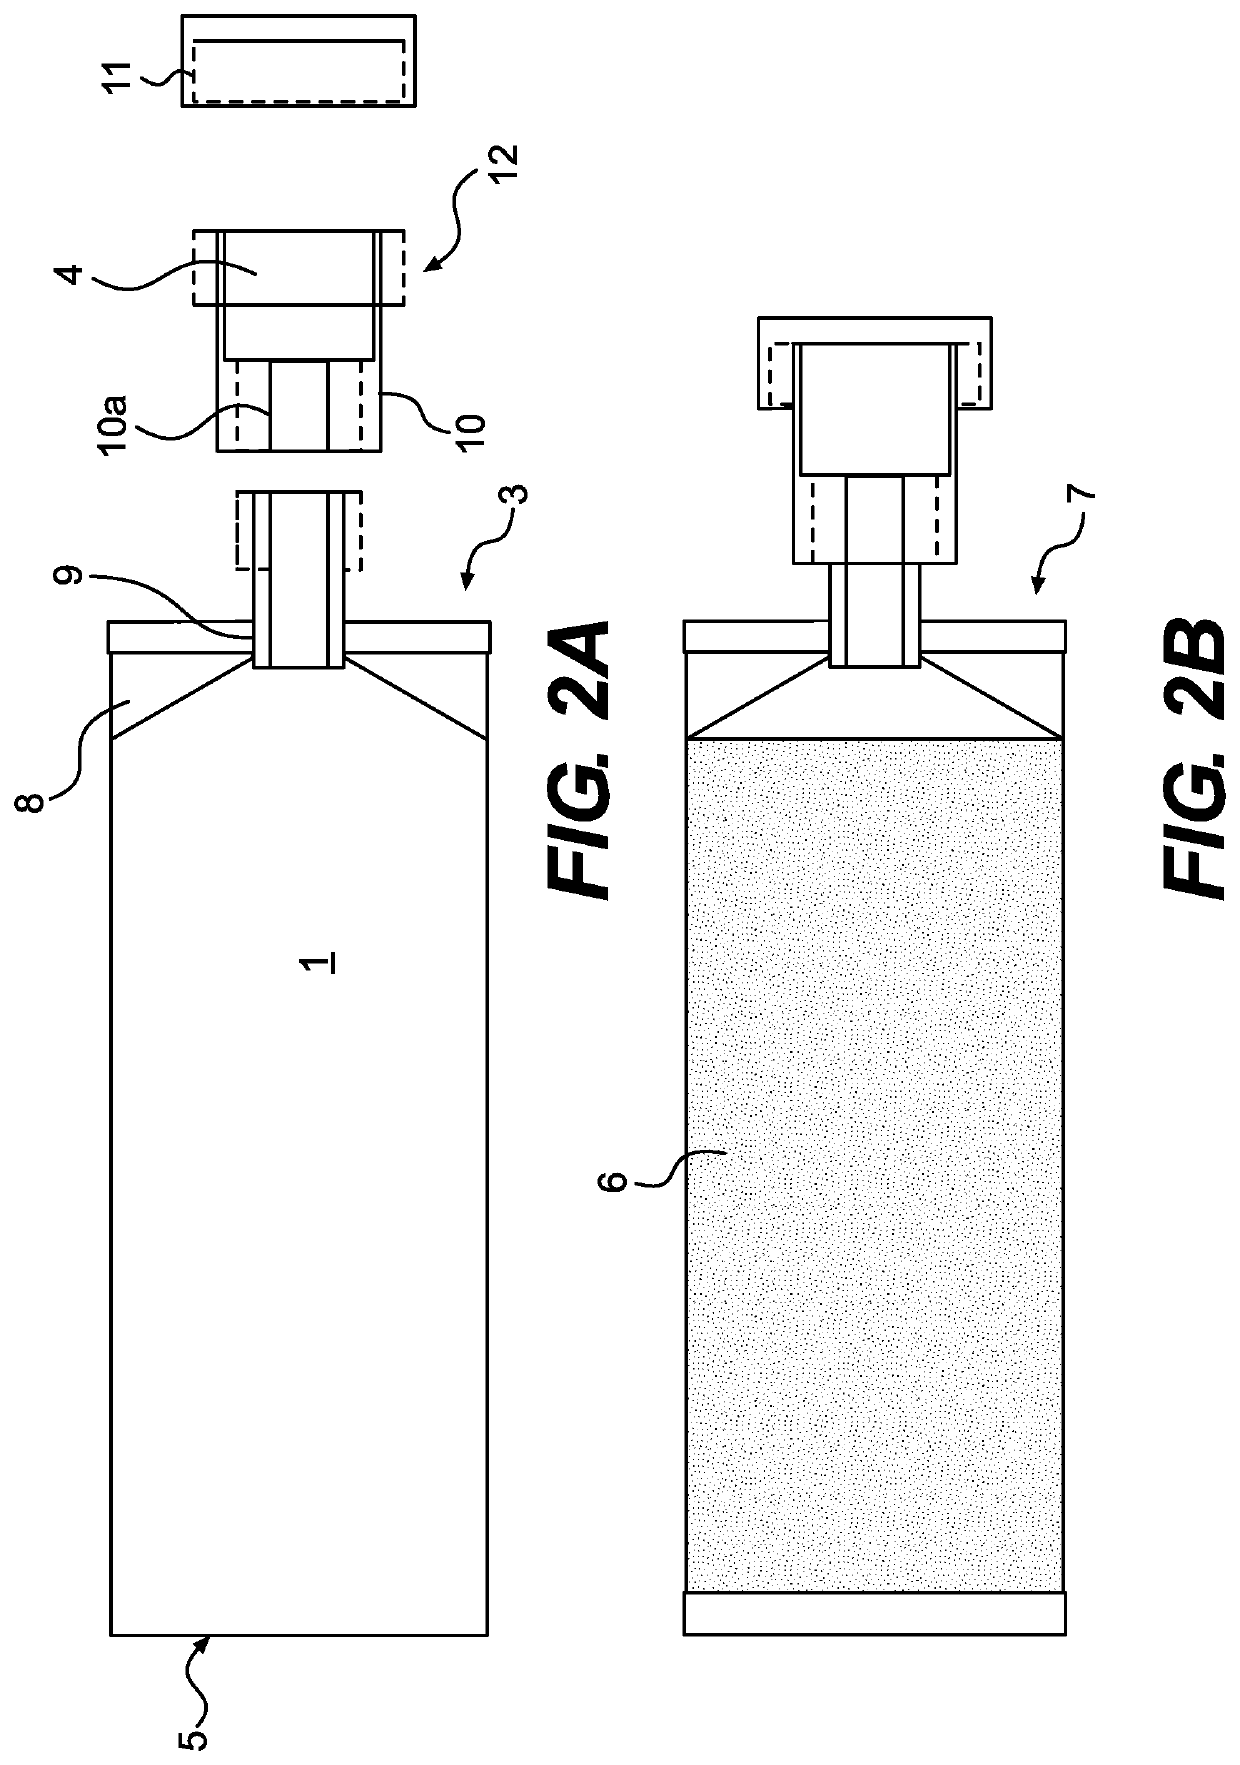 Packaging assembly for storing tissue and cellular material